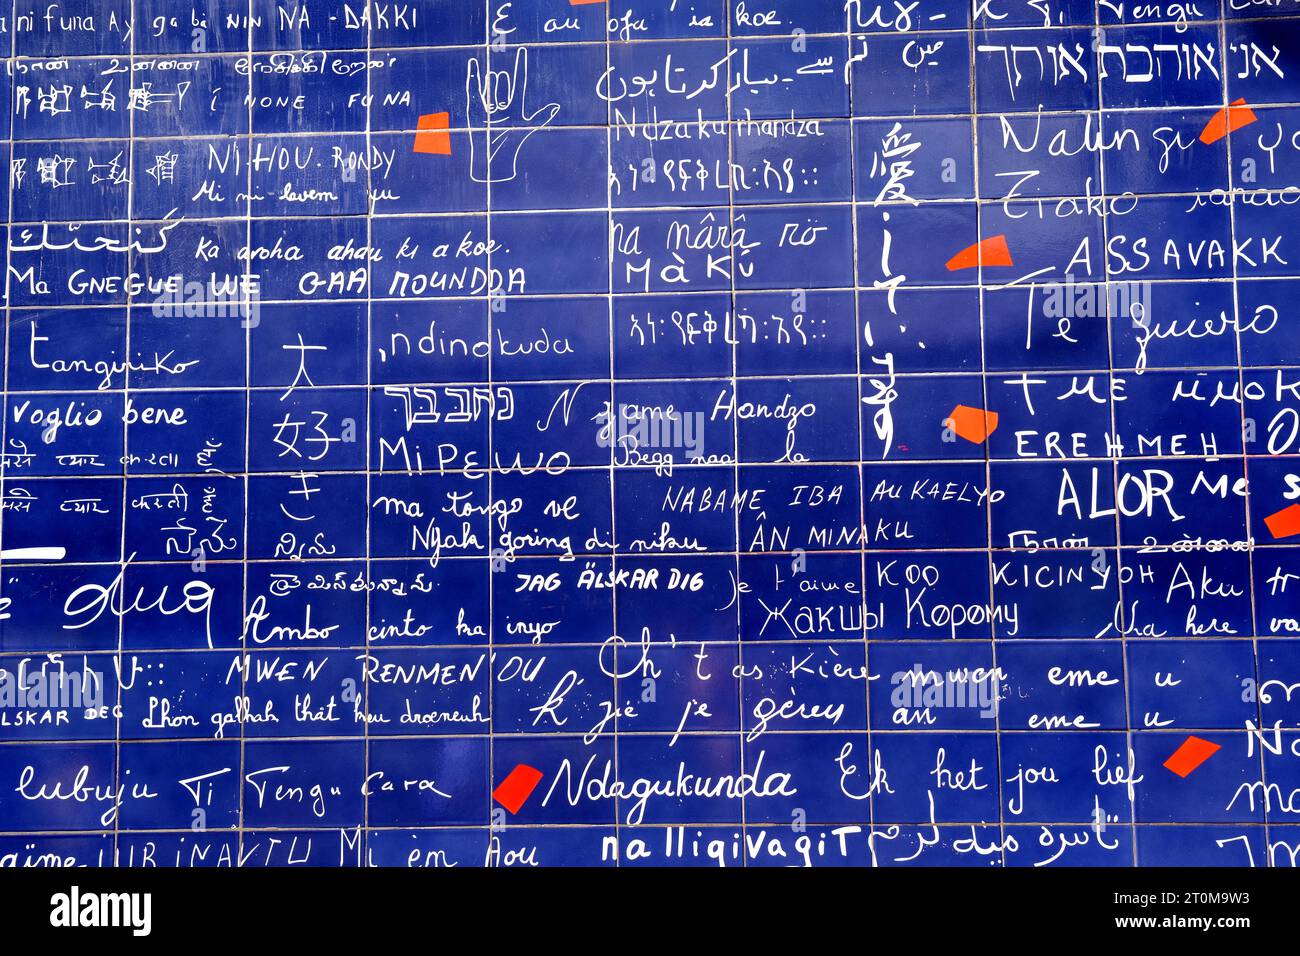 The Wall of Love in the Montmartre district of Paris. The wall contains the words I Love You 311 times in 250 languages. Stock Photo